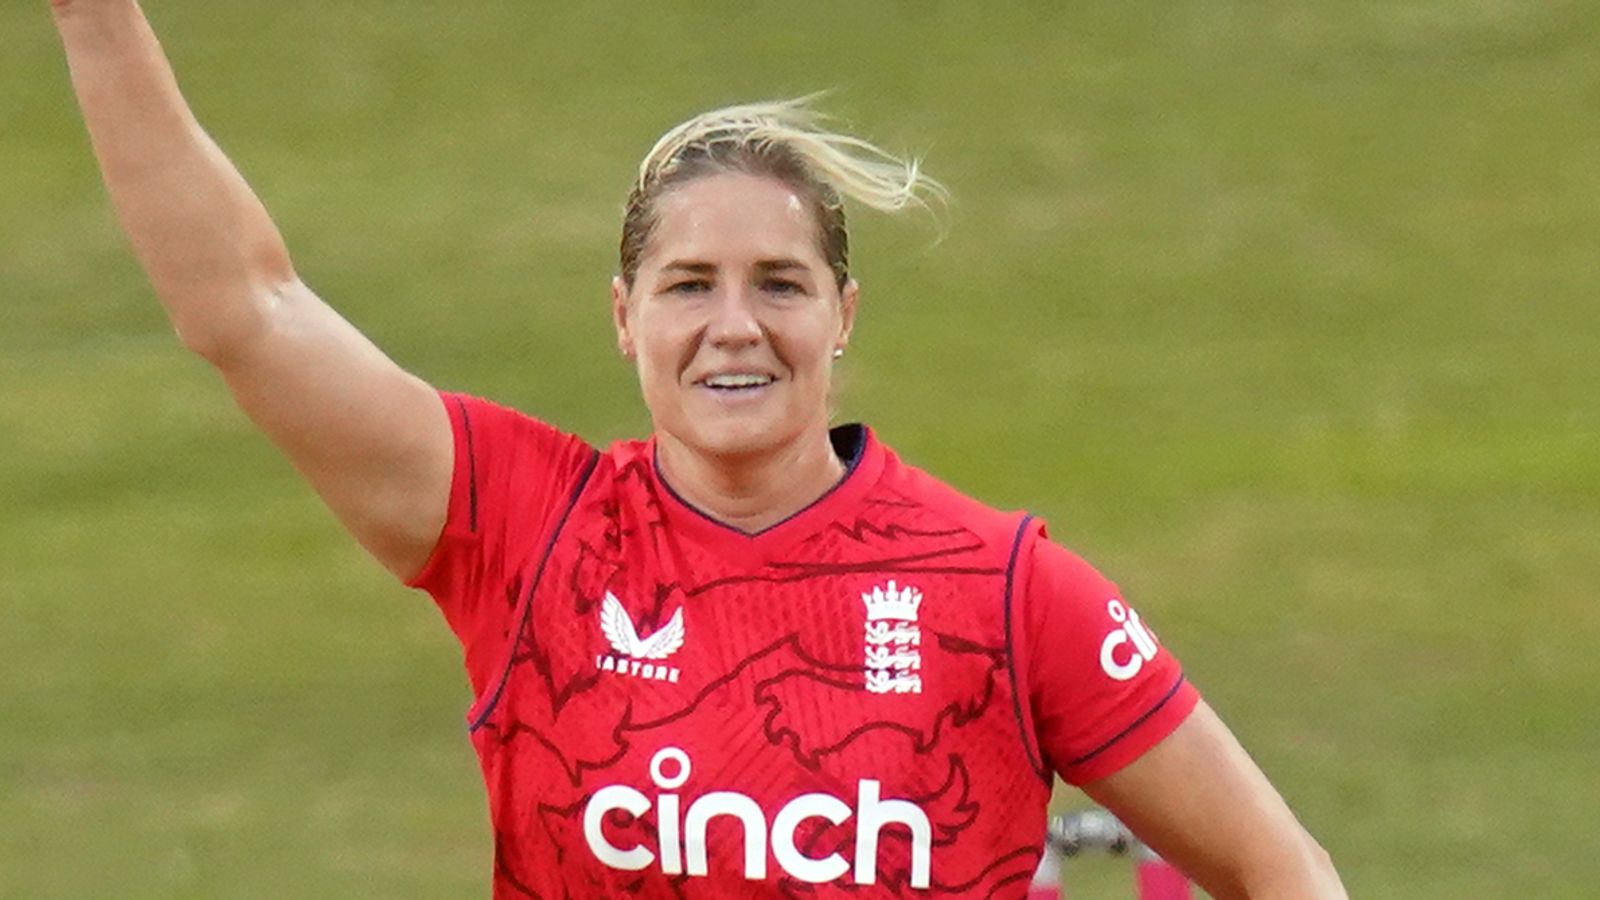 Katherine Brunt: Commonwealth Gold would be ‘nice little finish’, says England fast bowler